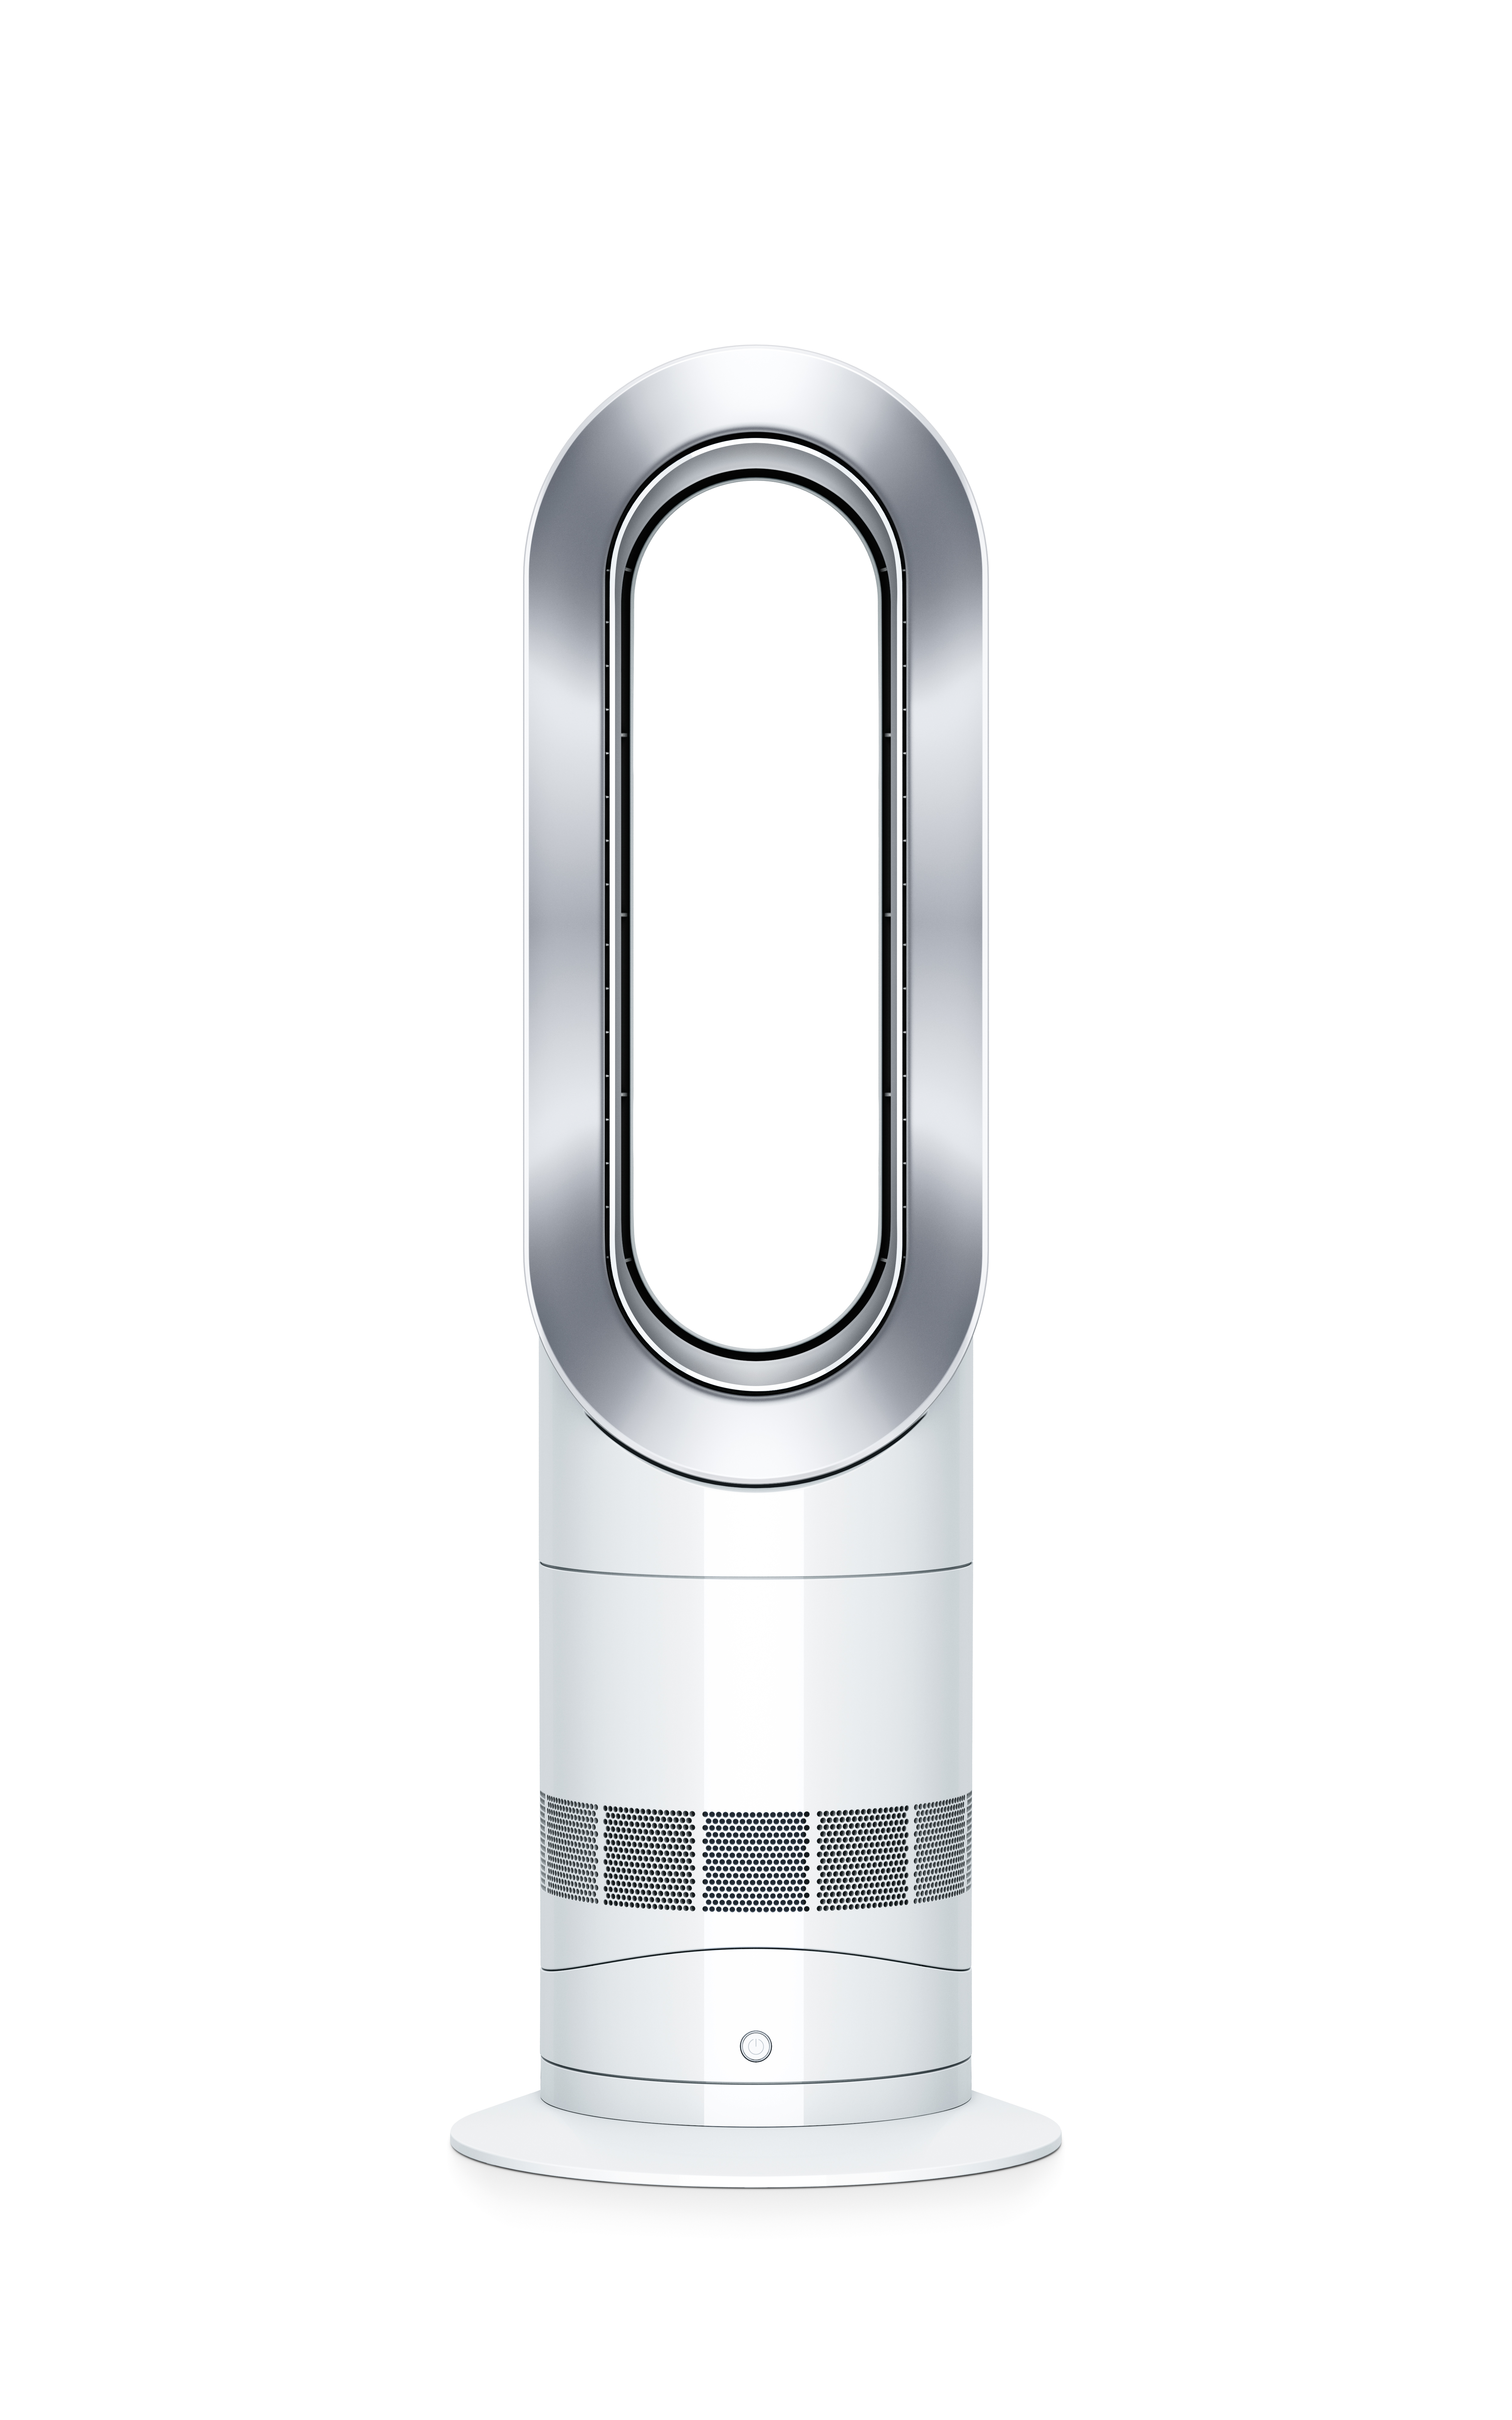 Dyson AM09 Hot and Cold Fan Heater - White and Nickel 